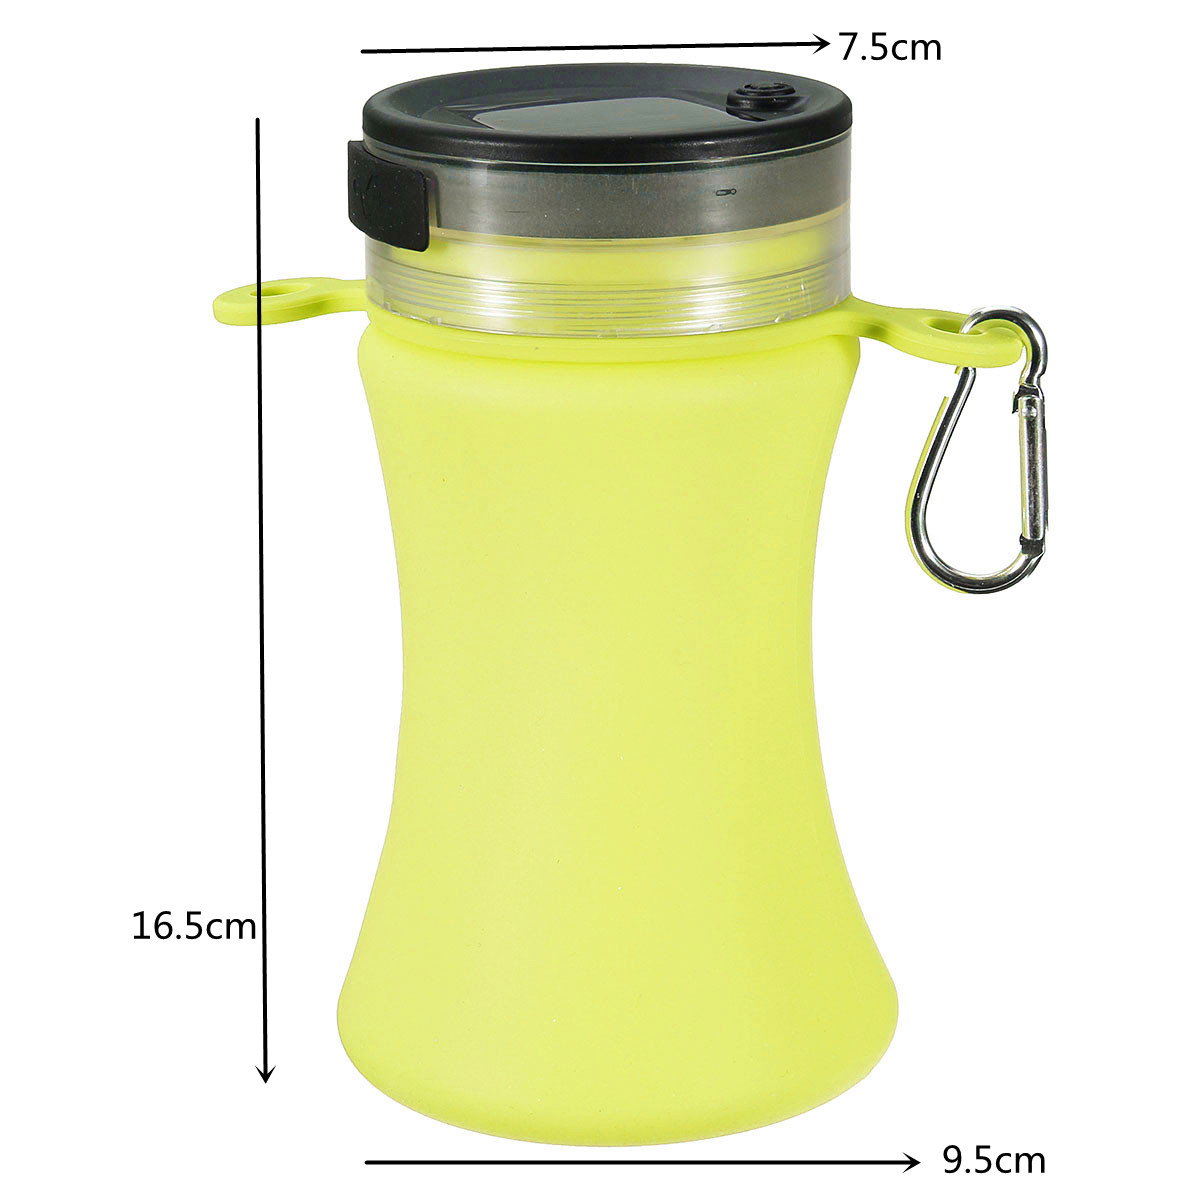 550ml-Collapsible-Silicone-Waterproof-Sport-Water-Bottle-With-Solar-Energy-Charge-LED-Camping-Latern-1142101-7